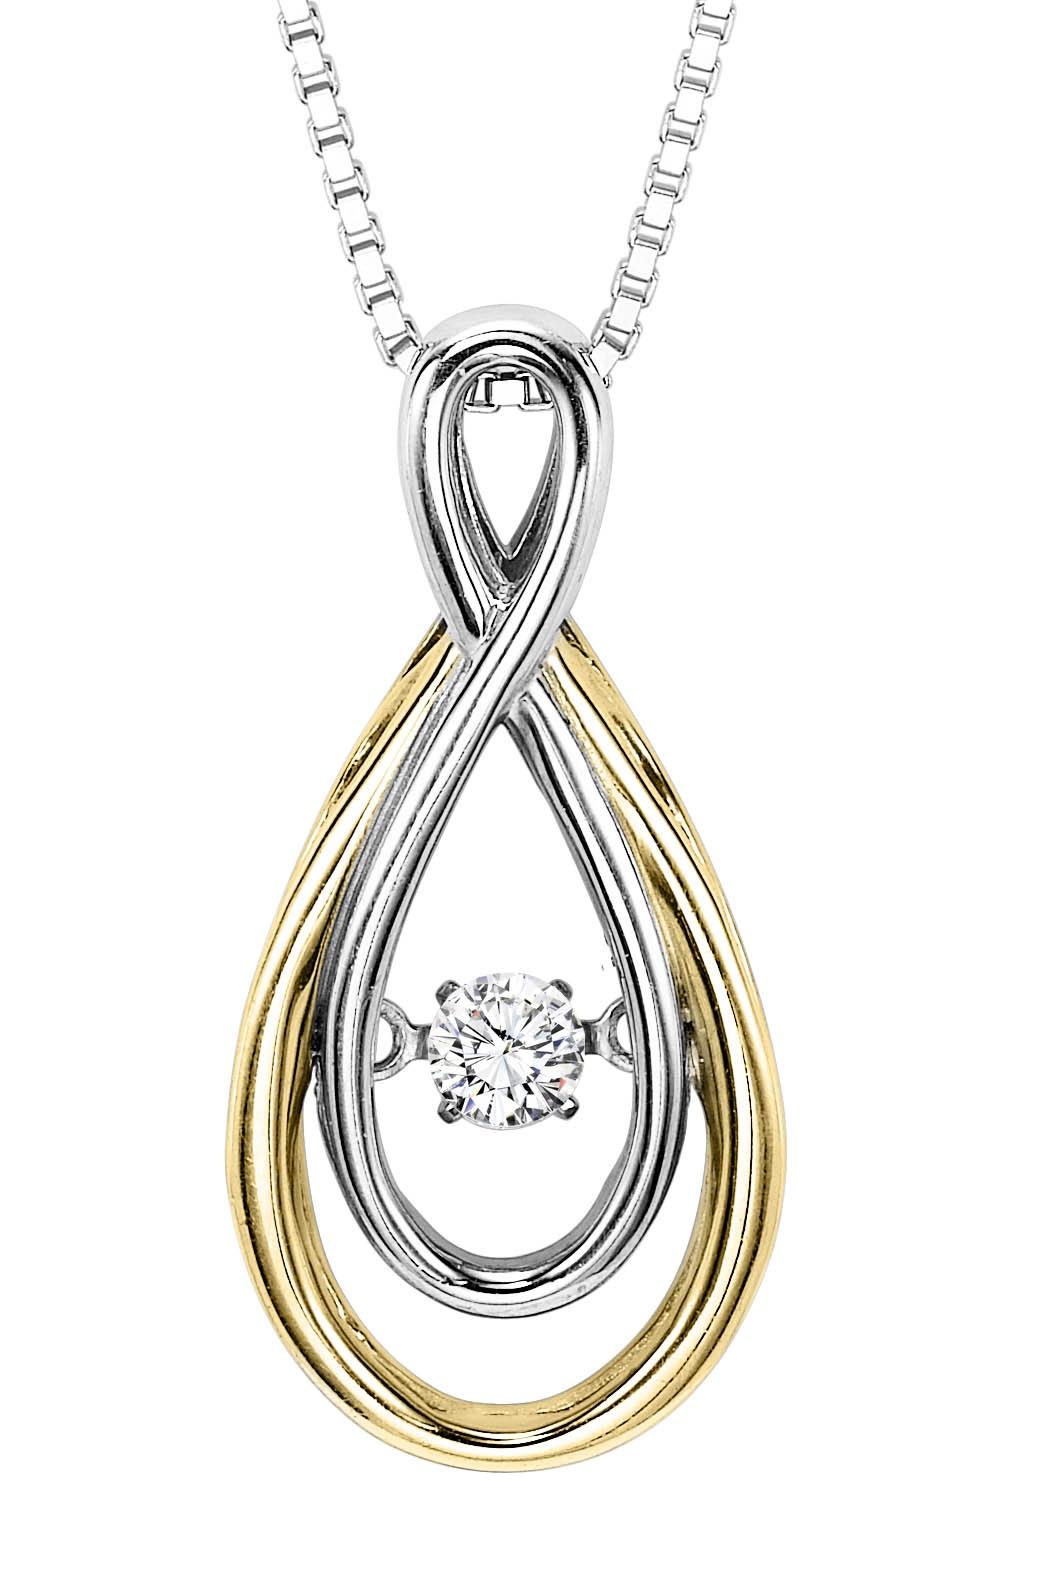 Rhythm of Love Pendant in 14K Yellow & White Gold - 1/10 ctw / ROL1008y